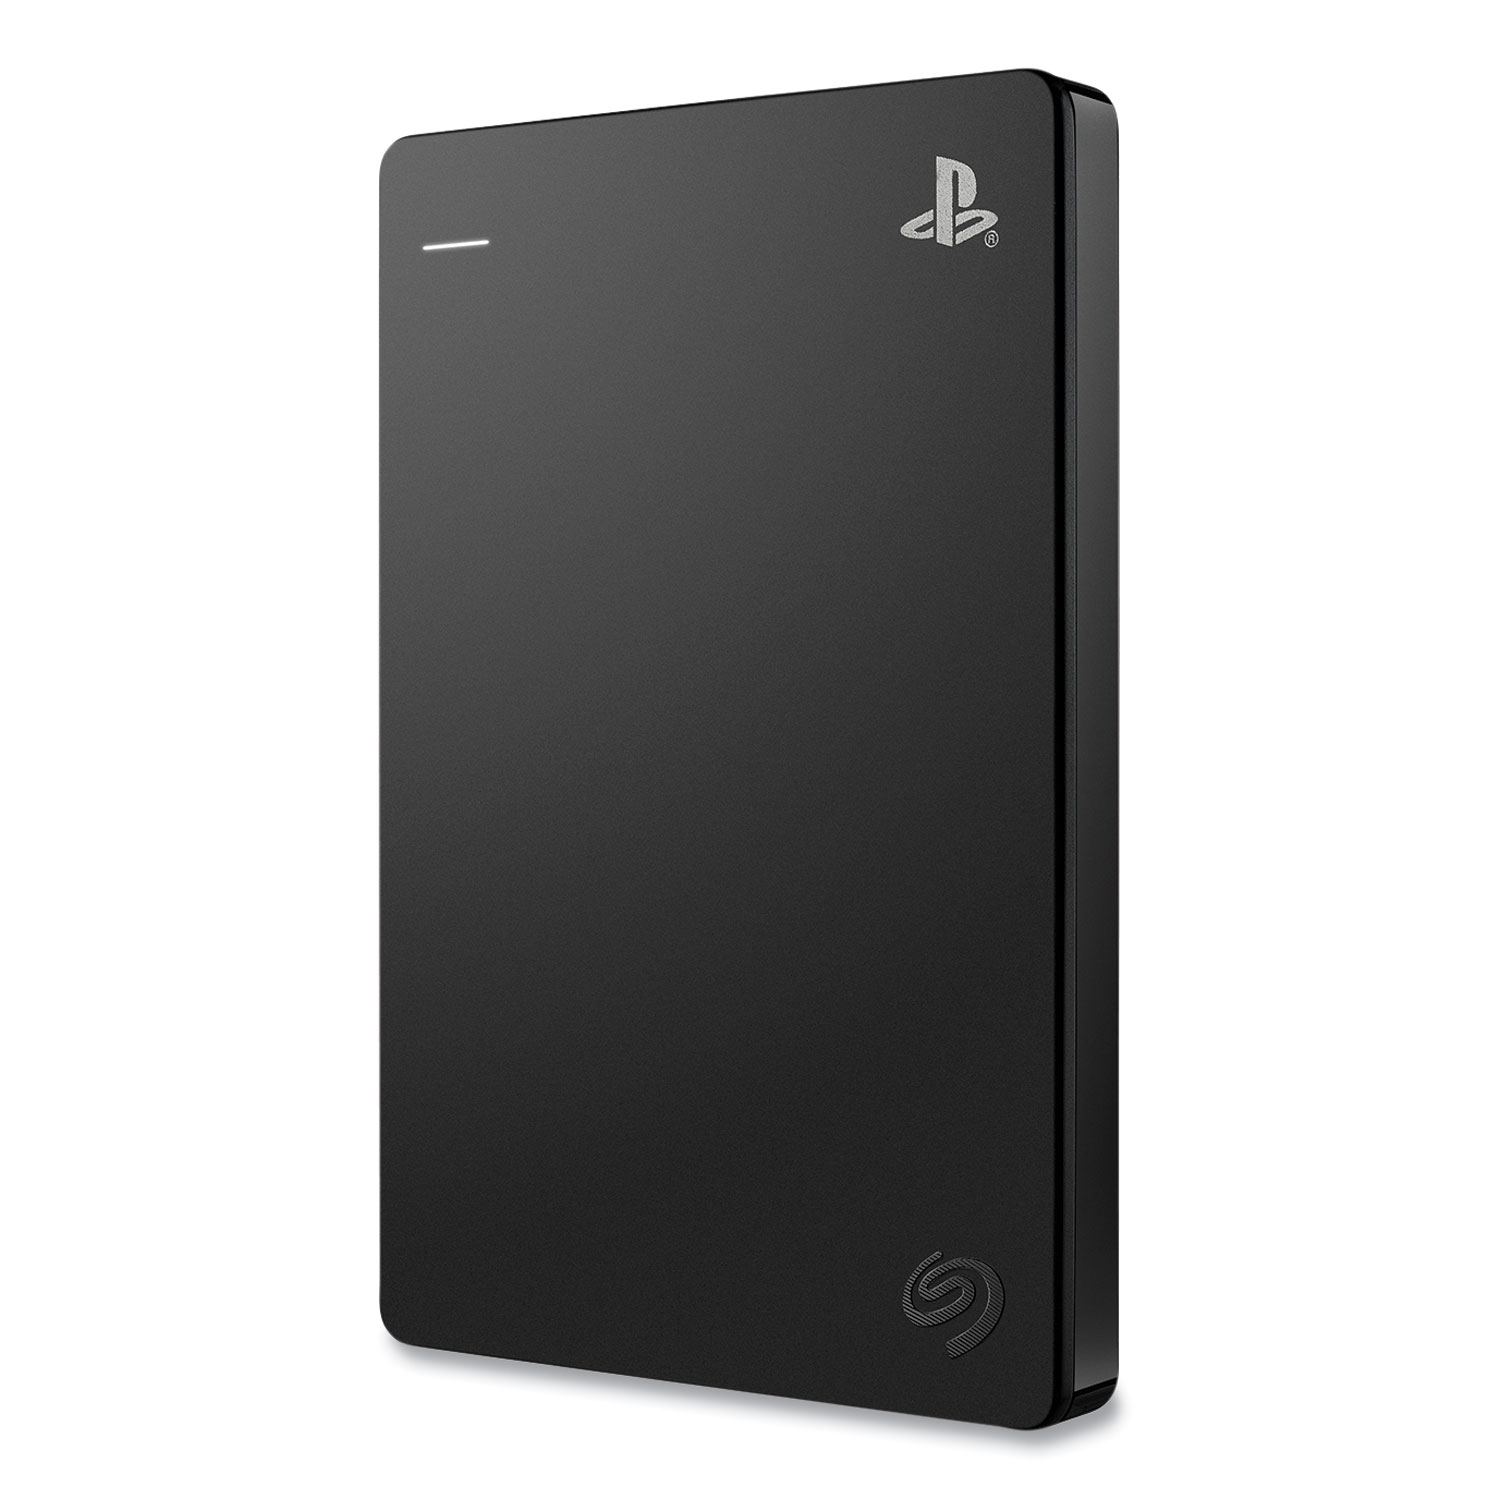  Seagate STGD2000100 Game Drive for PlayStation 4, 2 TB, USB 3.0, Black (SGT24451872) 